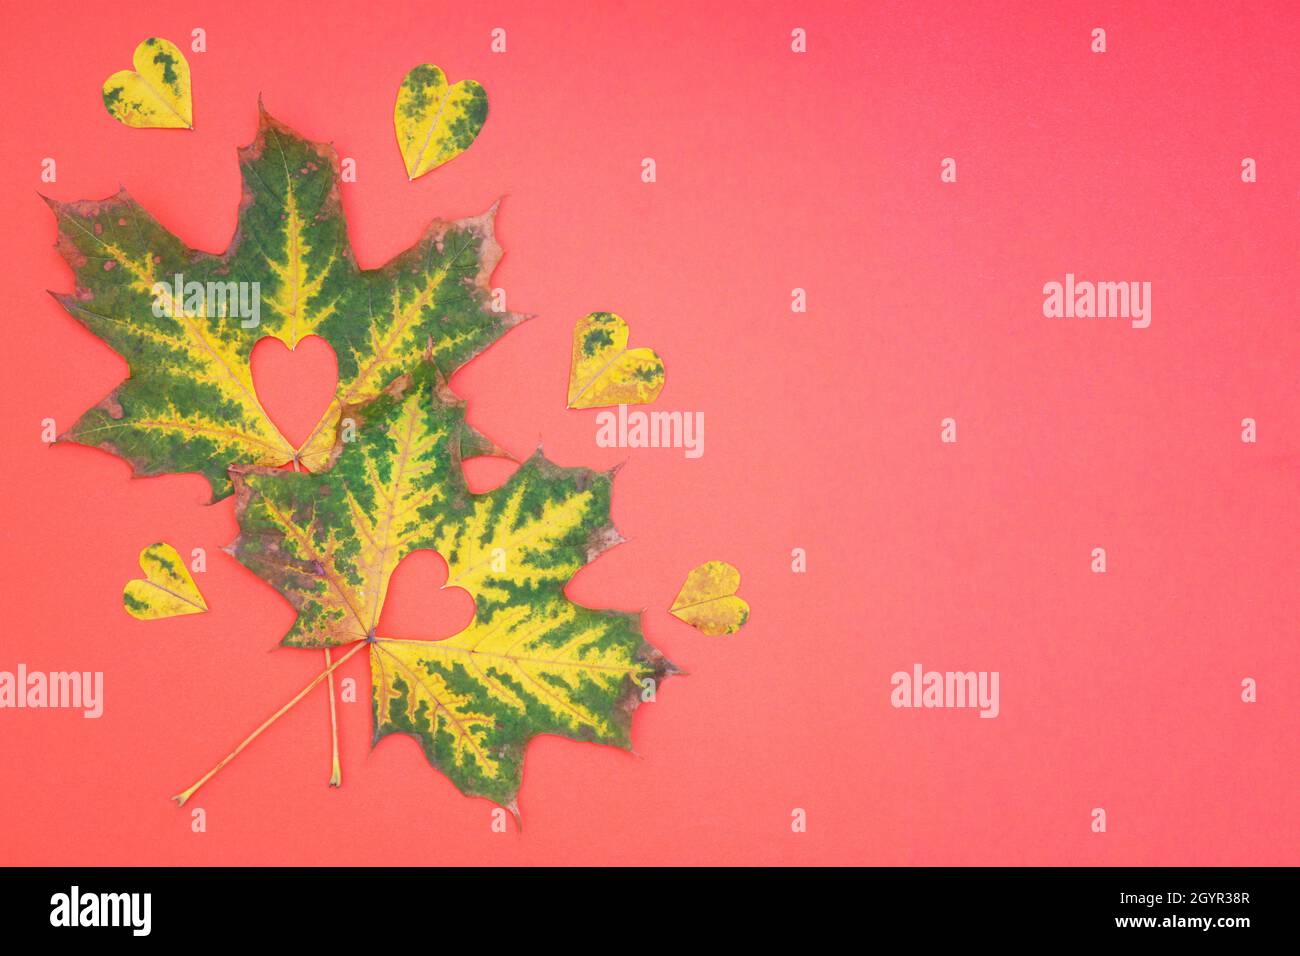 Two pigmented maple leaves with cut out heart shapes on a rose background. Romantic fall concept. Stock Photo